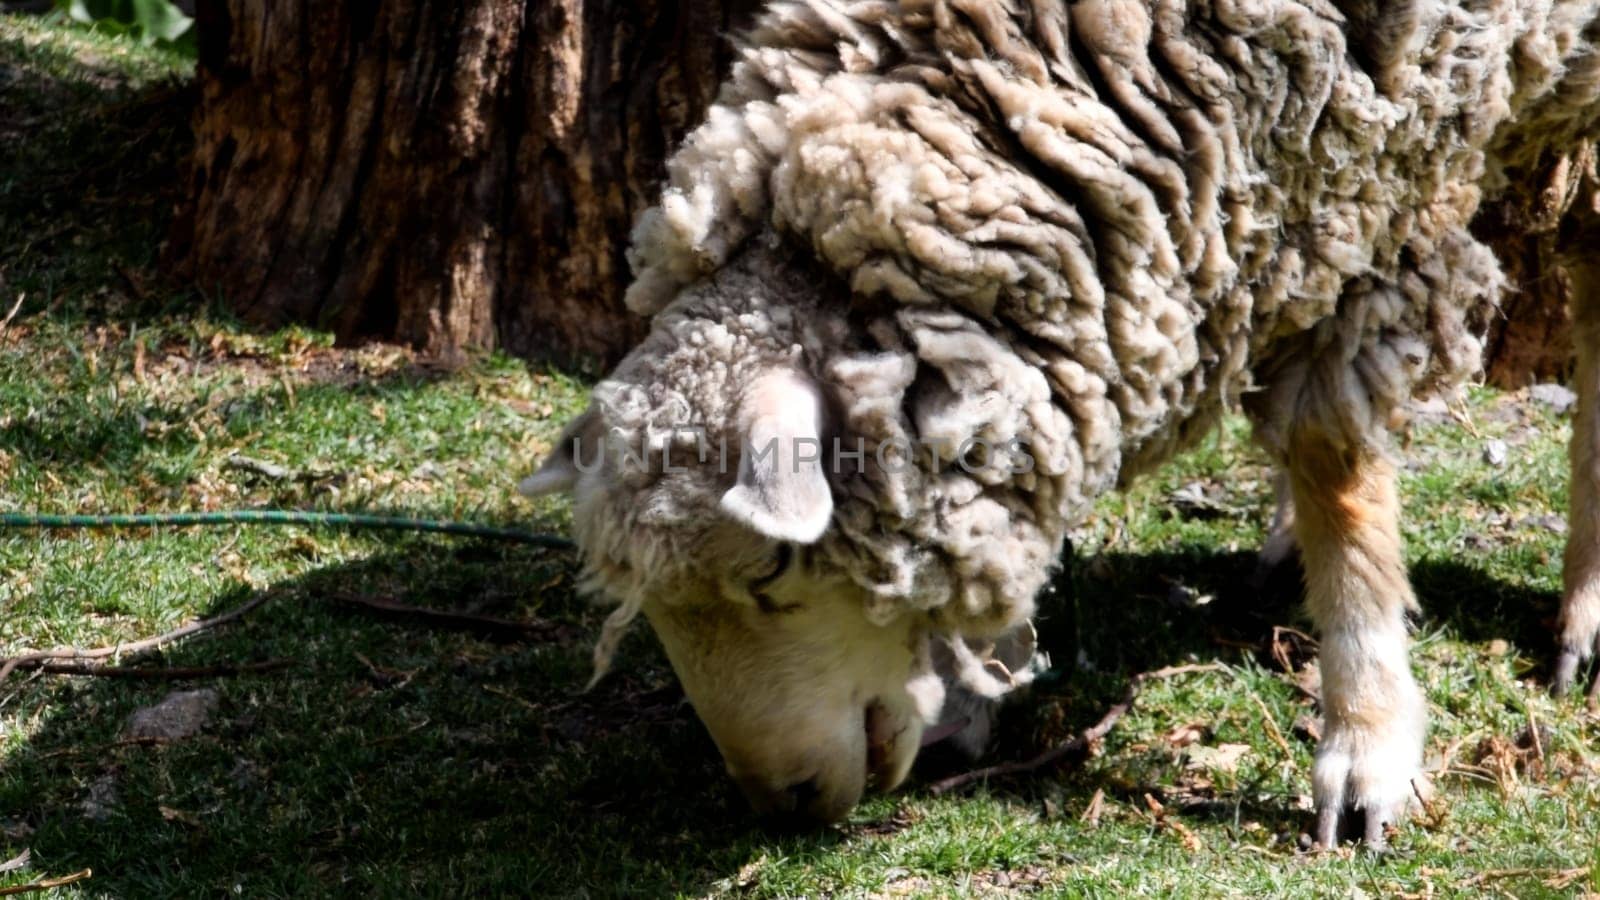 Close-up of a woolly sheep eating grass in a sunny, natural setting